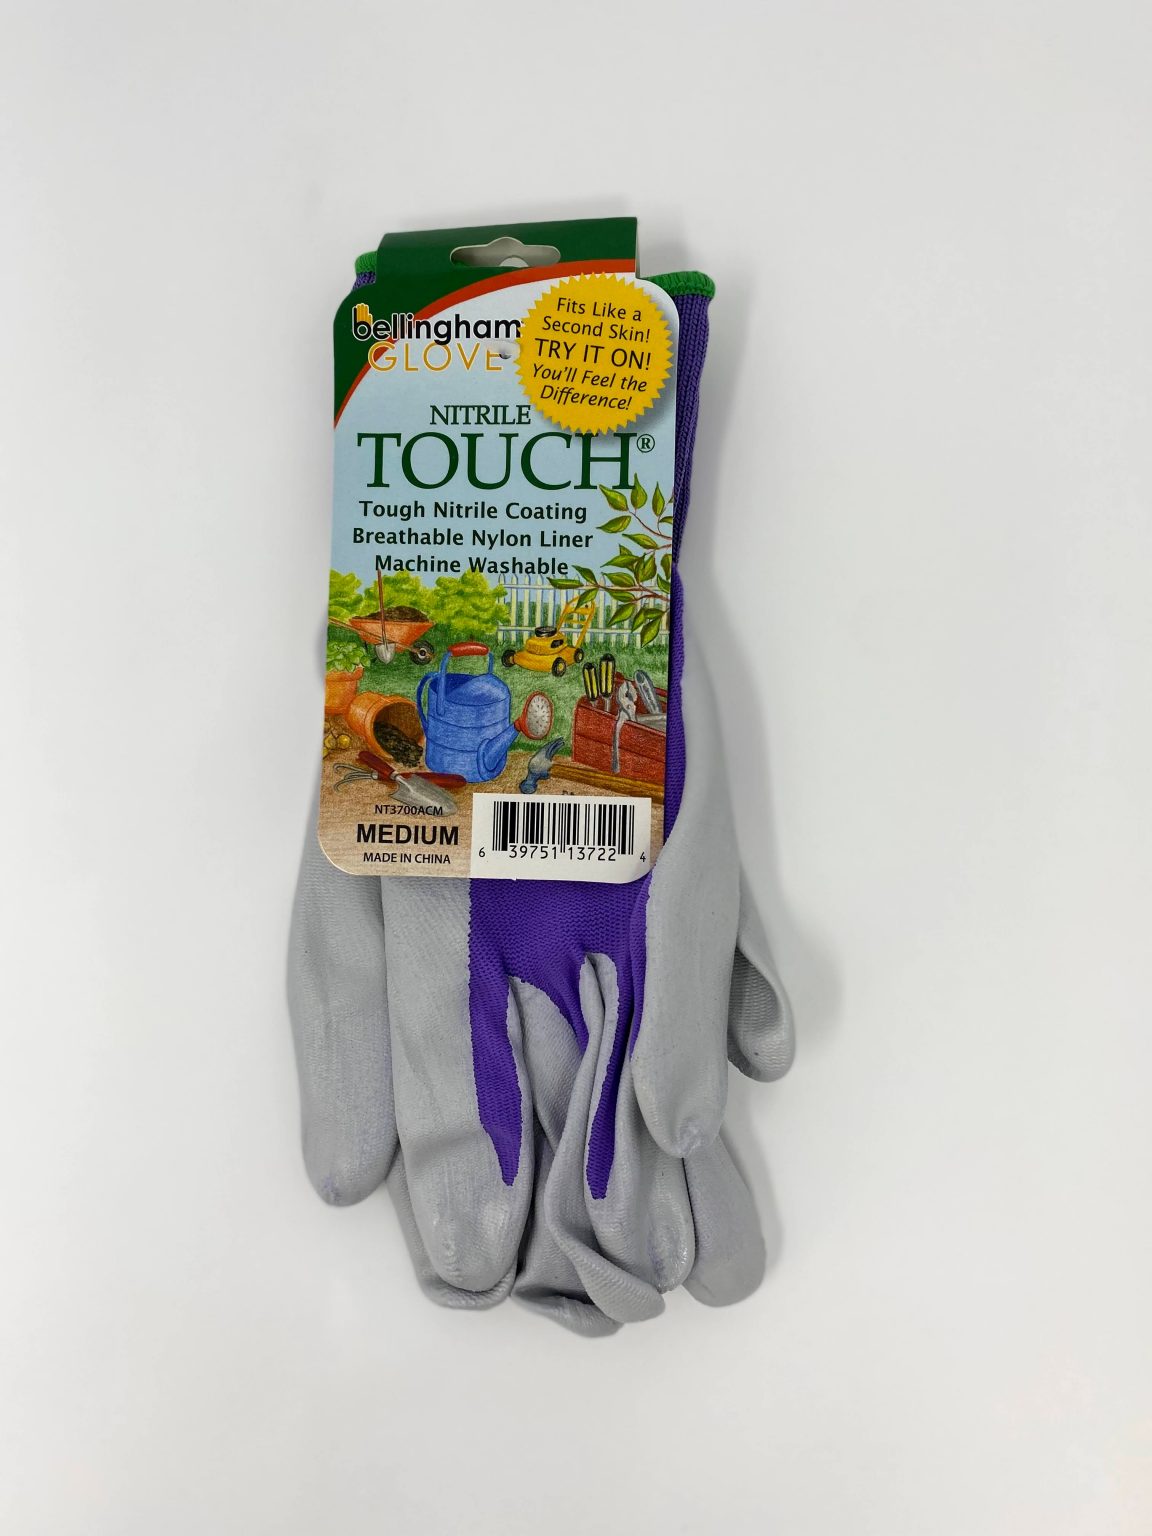 Nitrile TOUCH® Bellingham glove in purple color